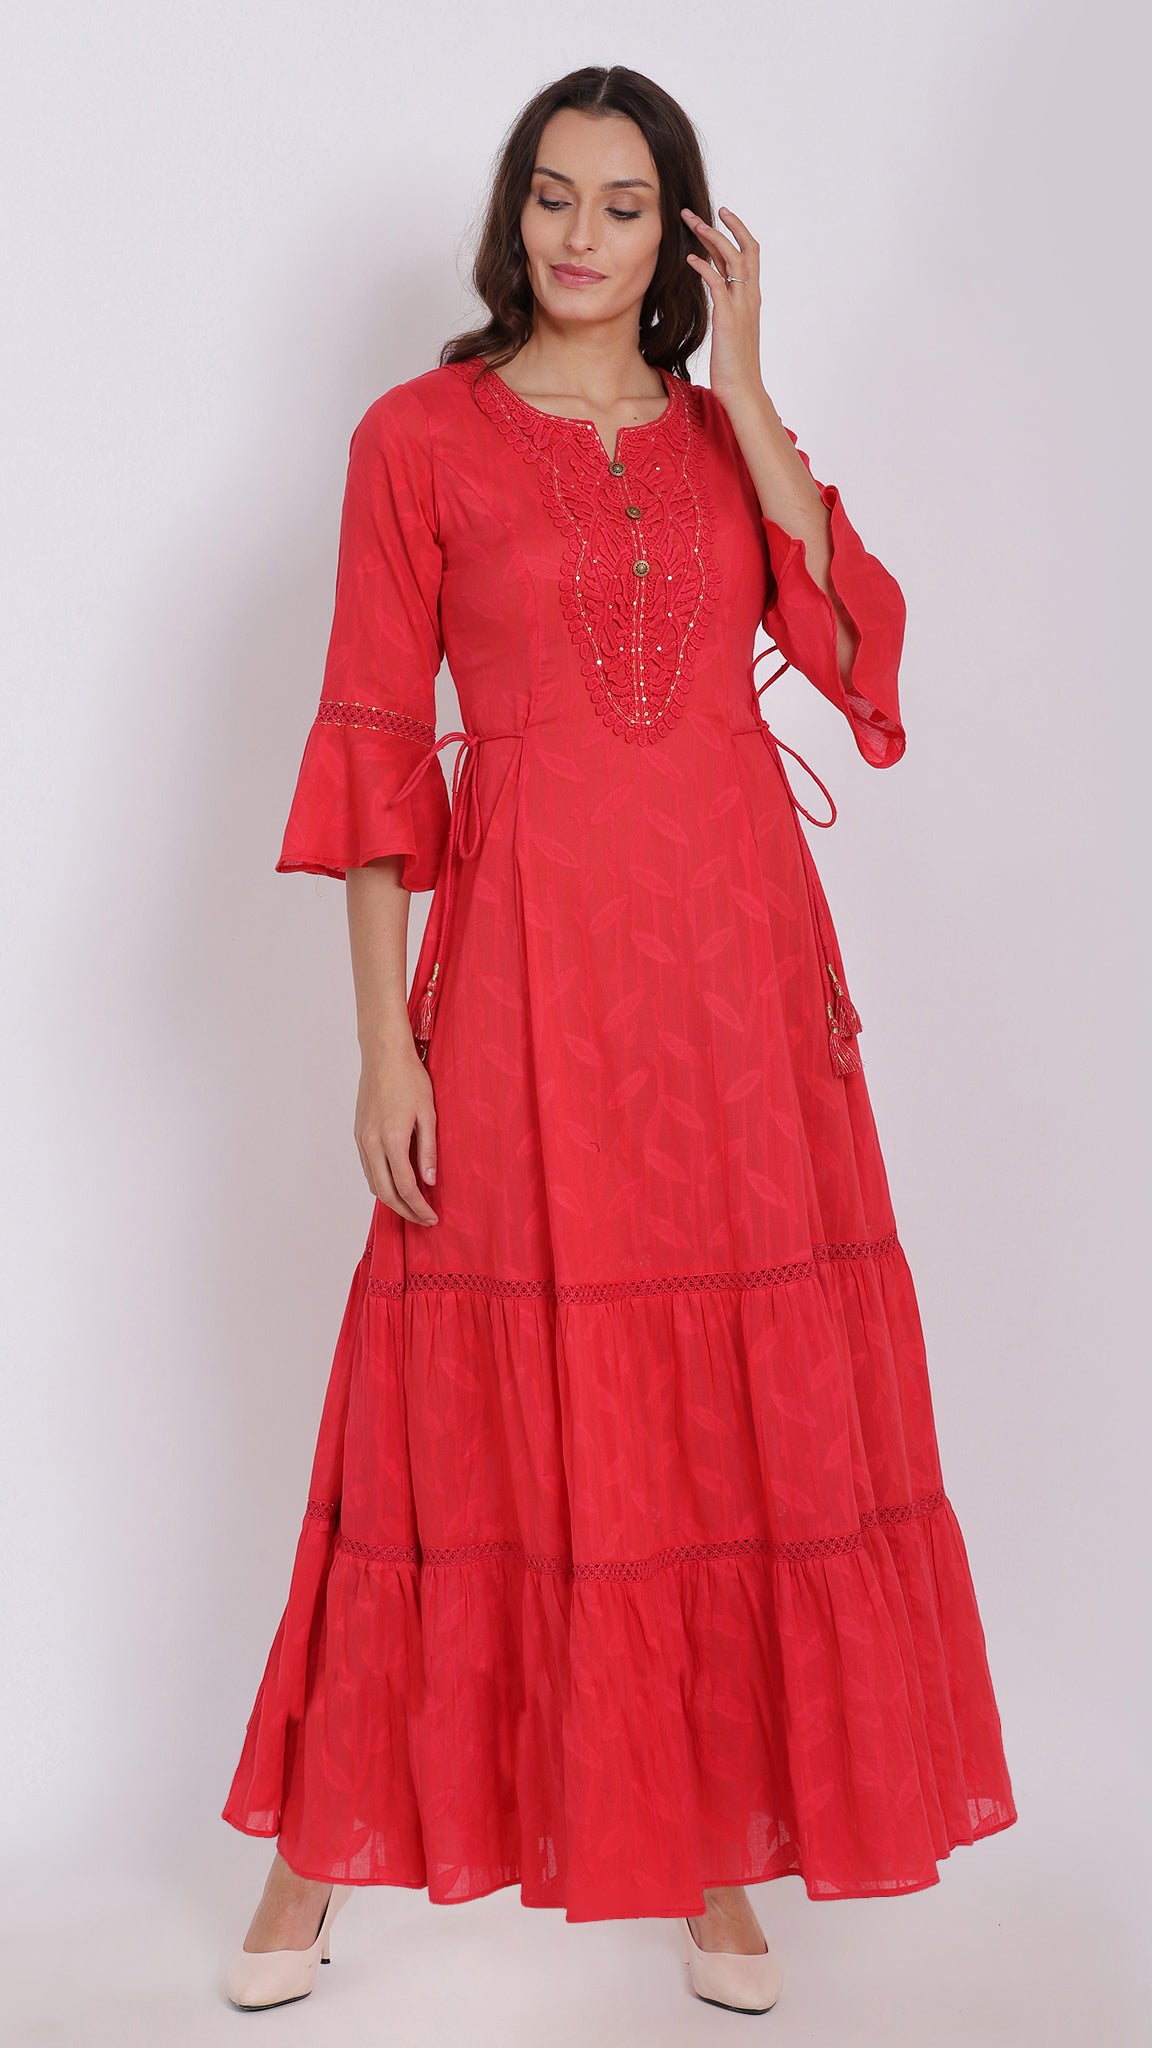 Embroidered neck coral tiered dress